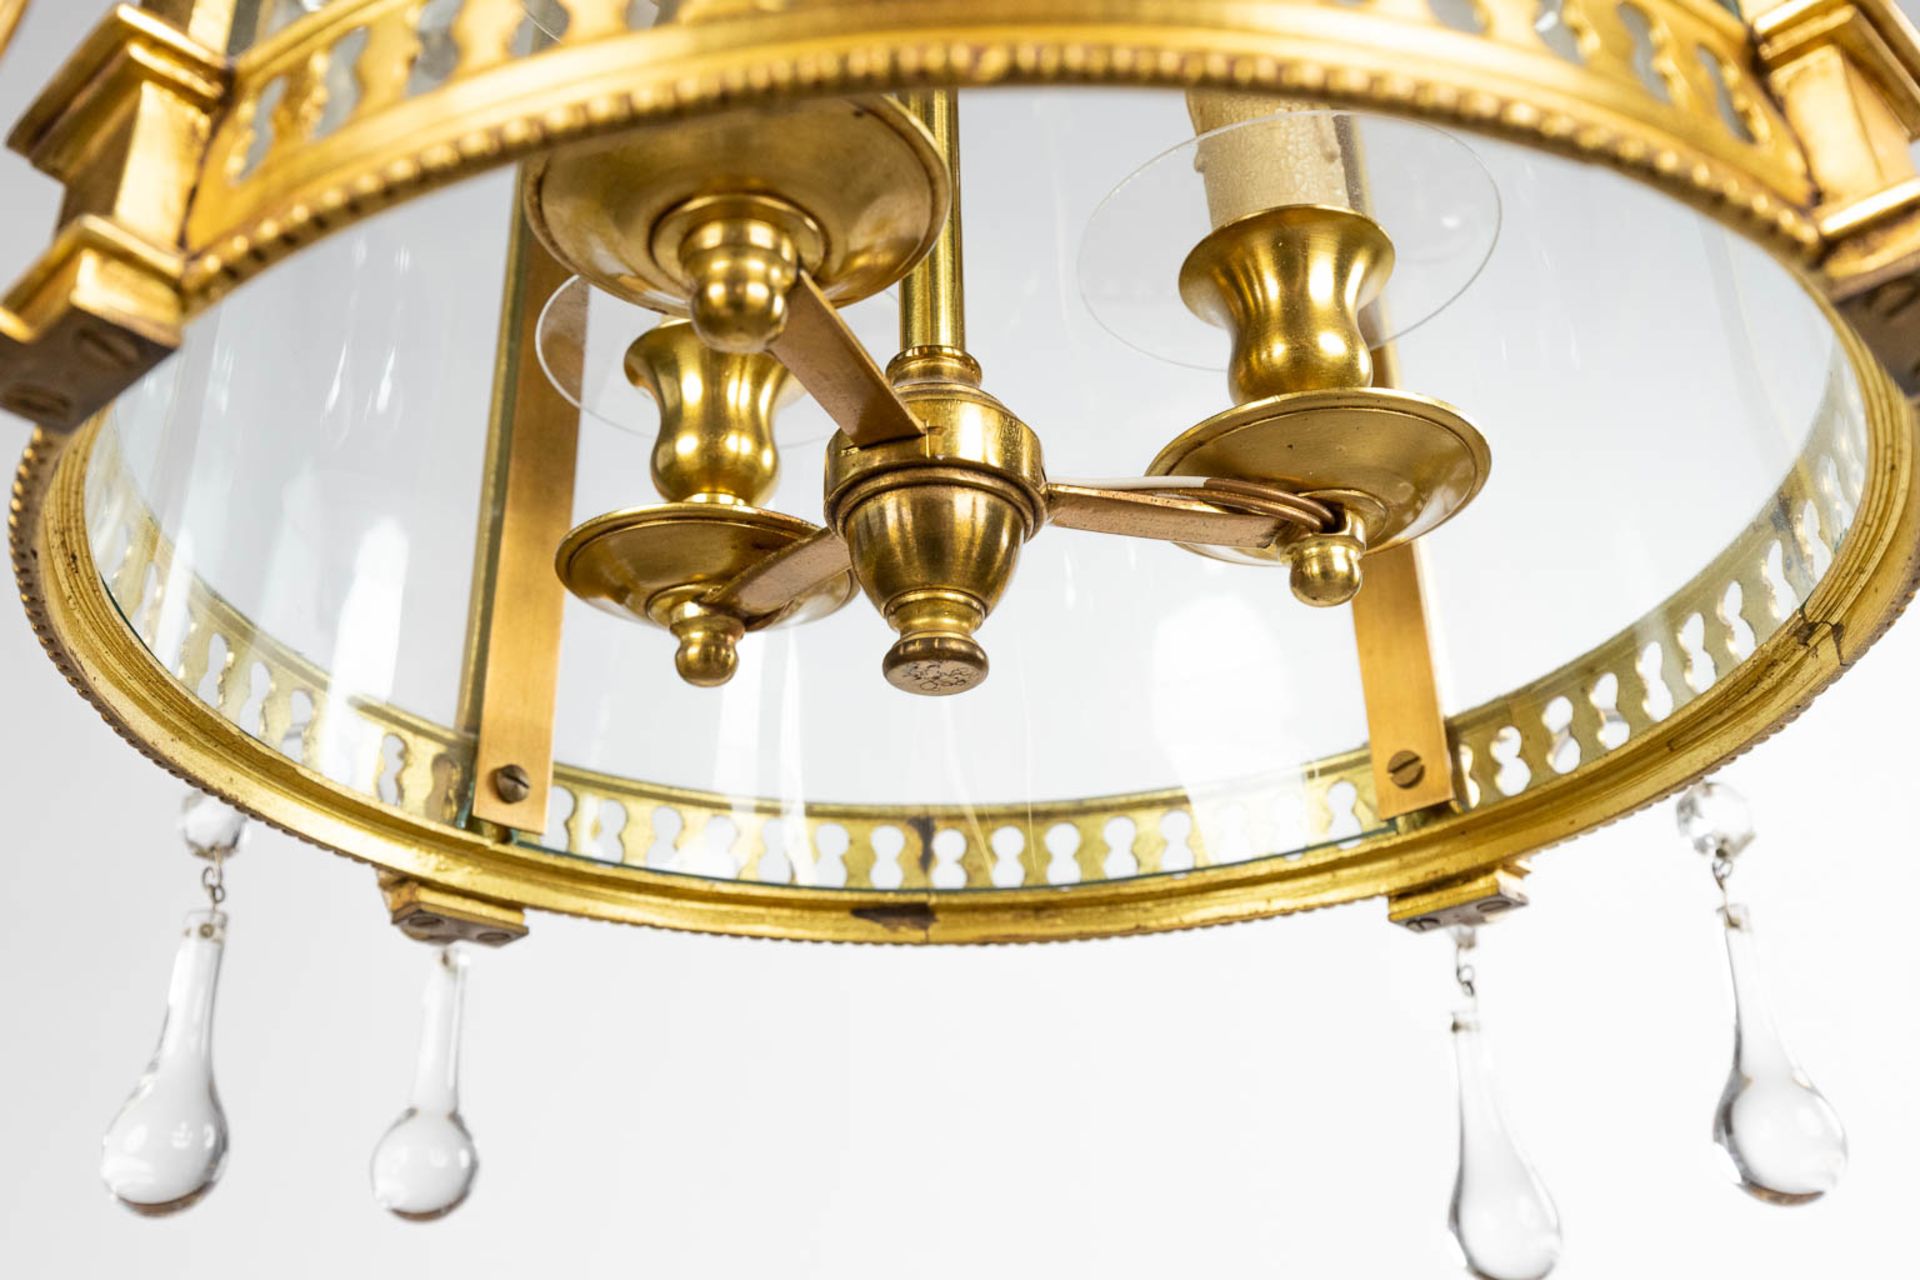 A hall lamp made of brass and glass. Circa 1970. (H: 67 x D: 36 cm) - Image 9 of 9